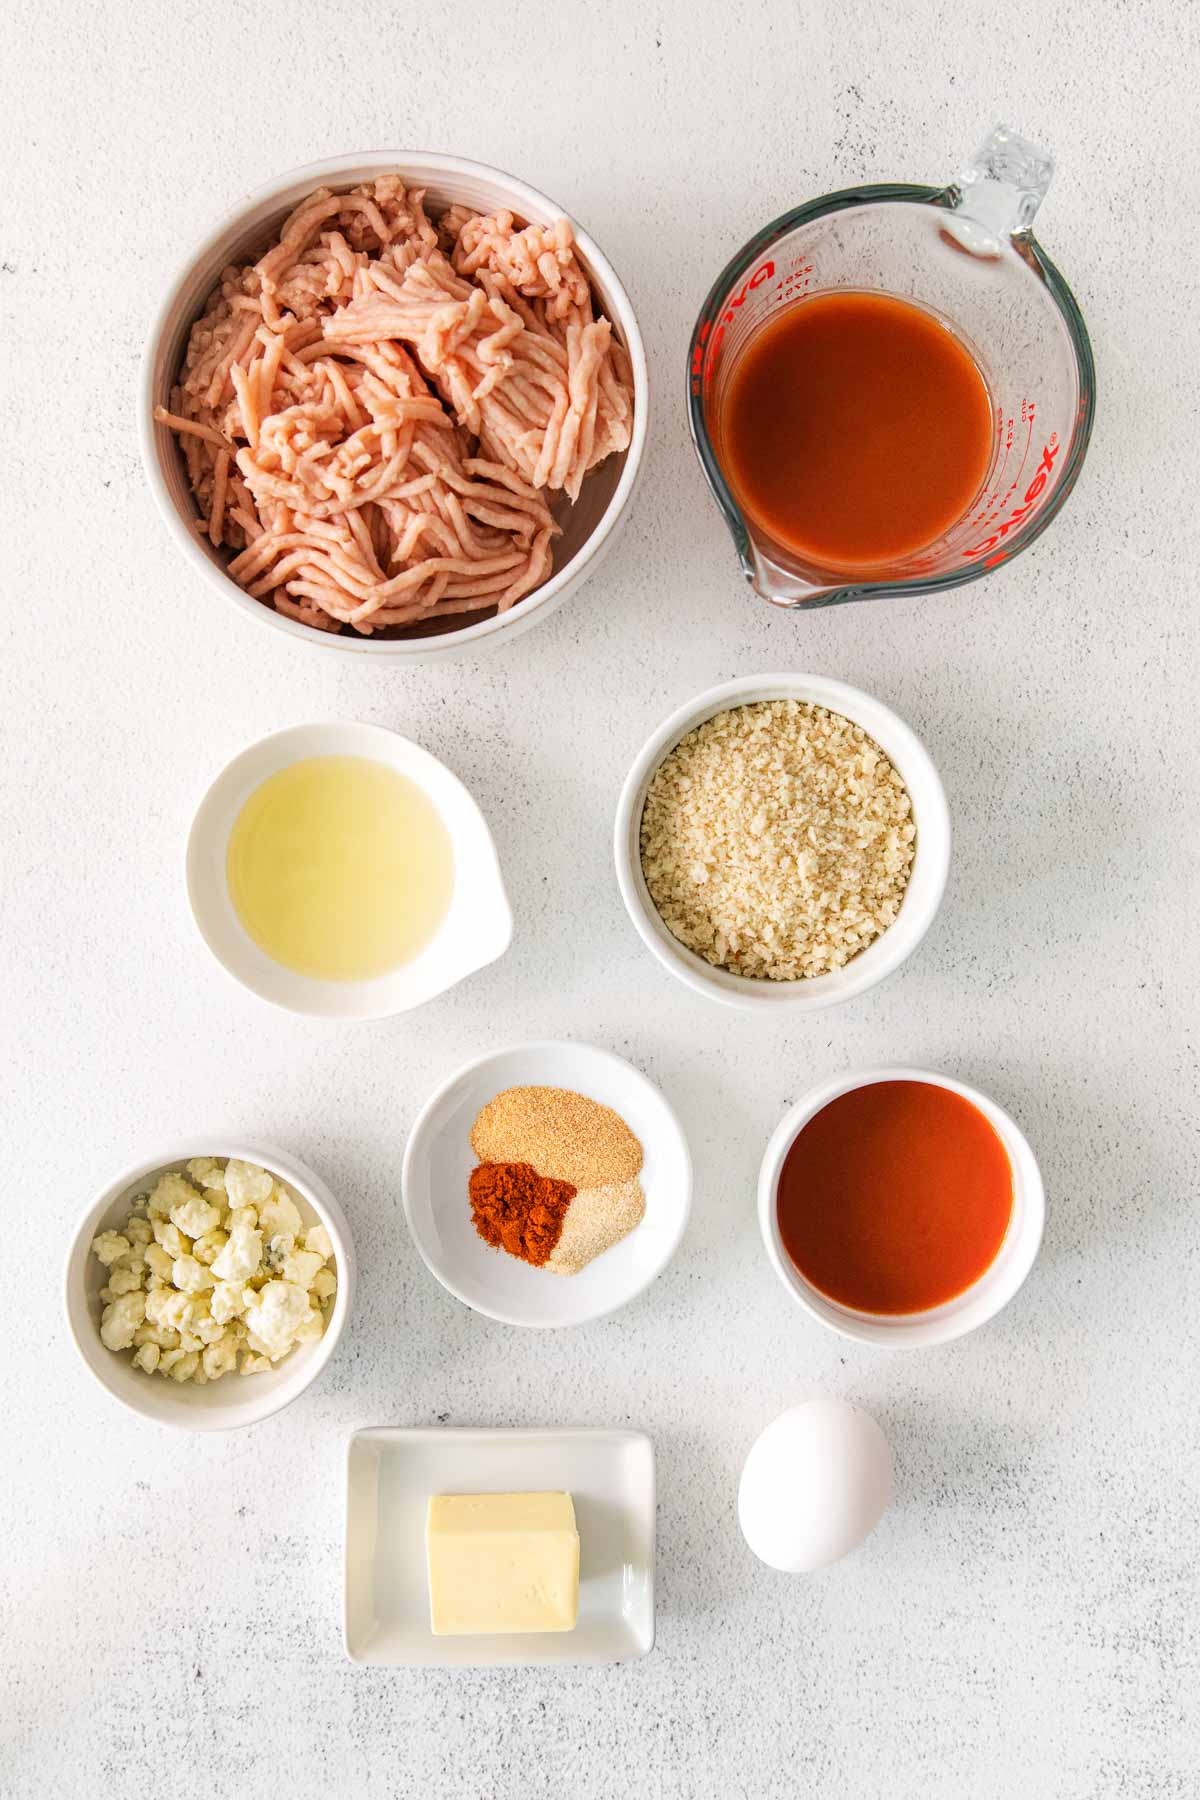 several white bowls with ingredient for buffalo chicken meatballs - raw ground chicken, buffalo sauce, butter, egg, pano breadcrumbs, blue cheese, spices and oils